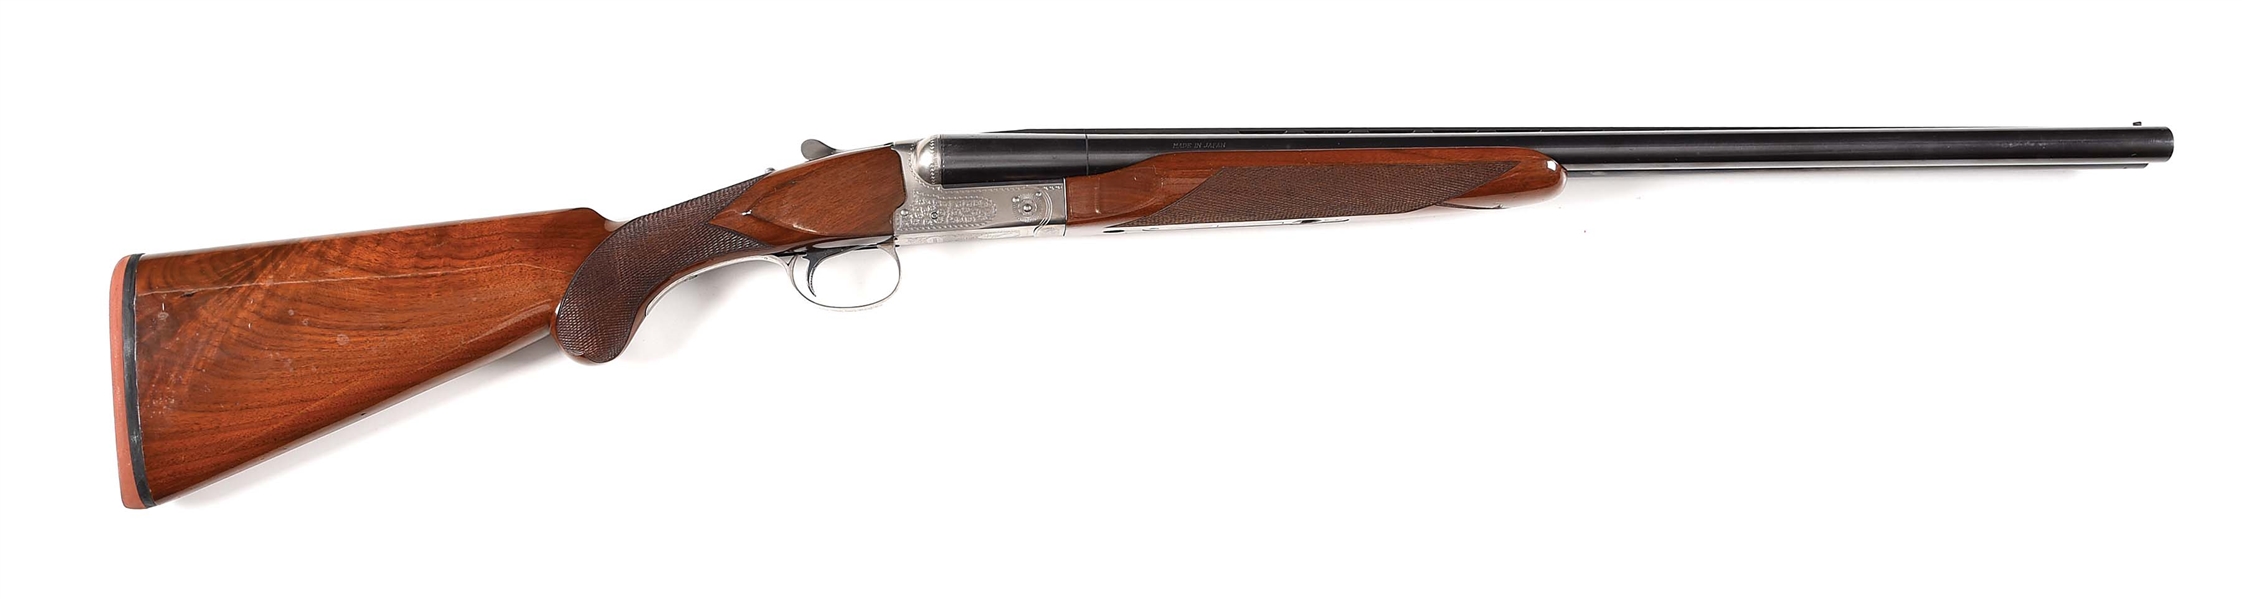 (M) WINCHESTER MODEL 23 SIDE BY SIDE SHOTGUN WITH CASE. 